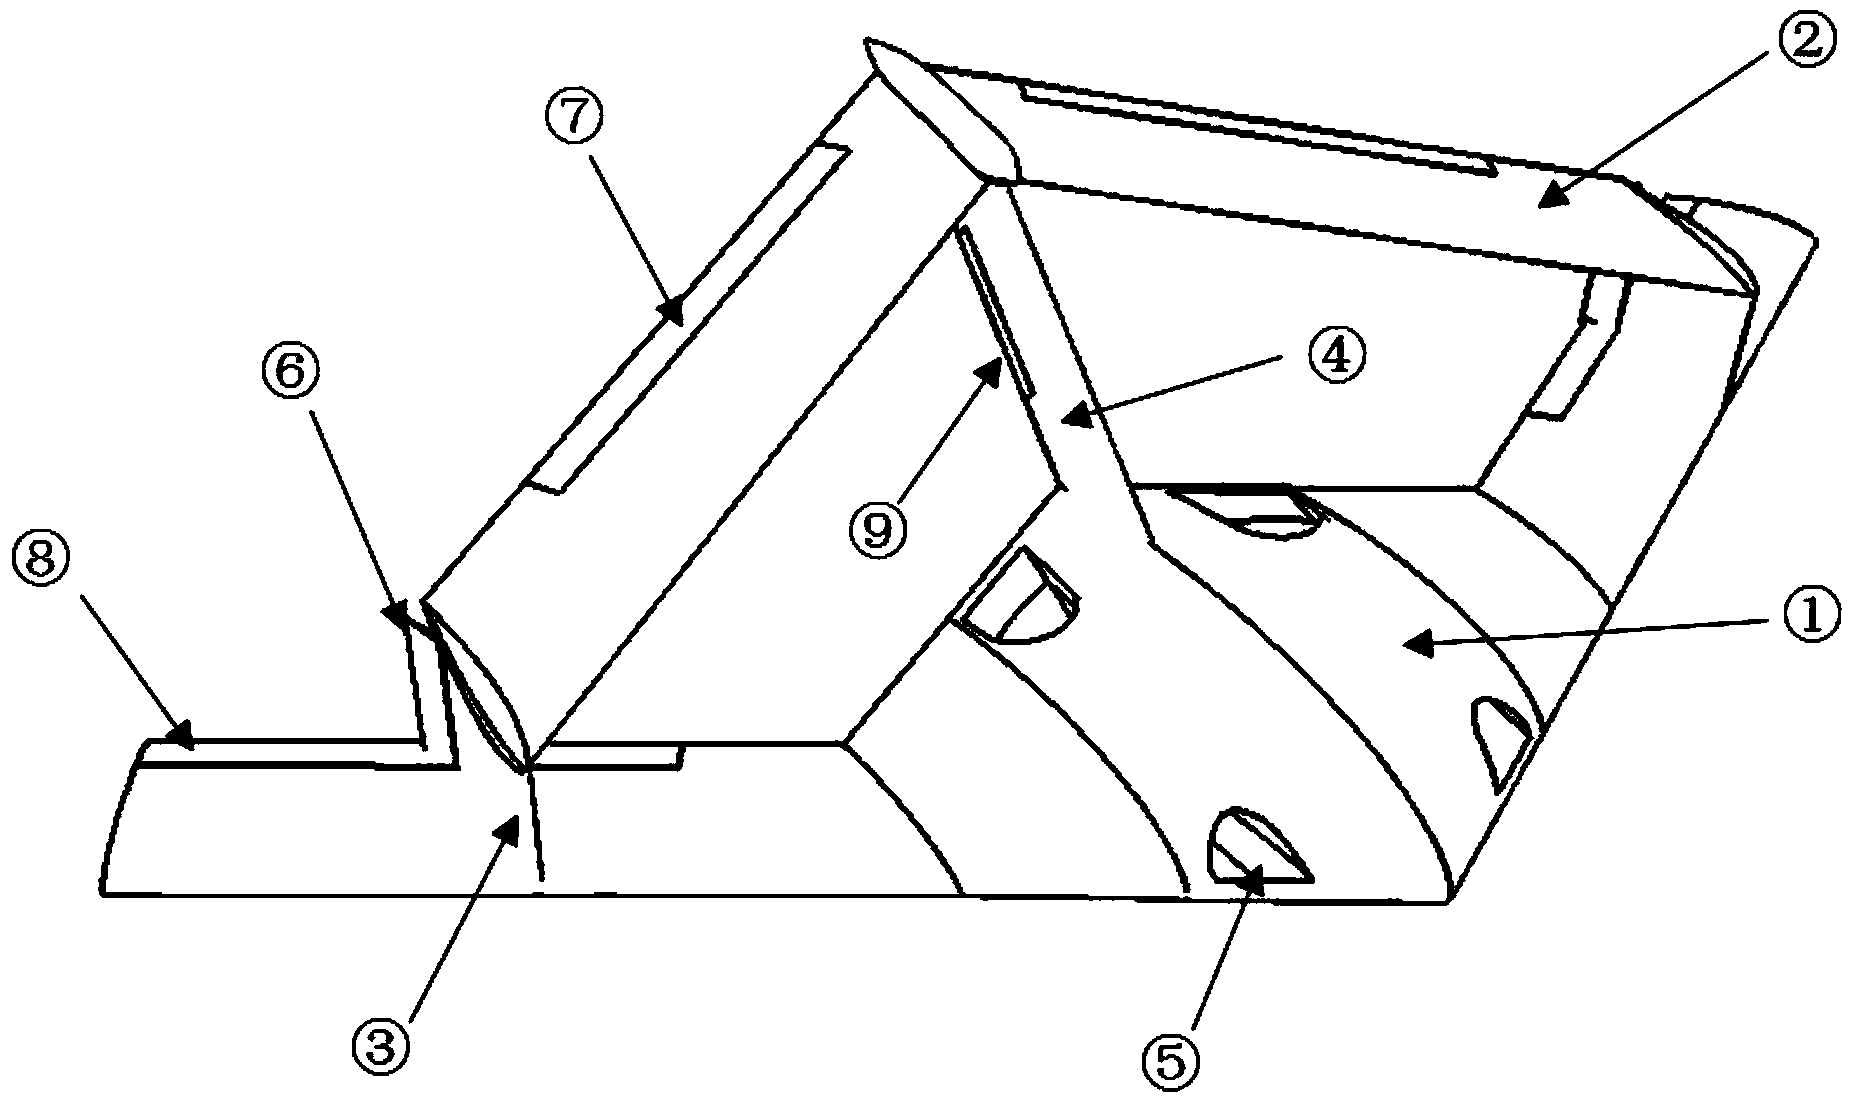 Airplane with combined-wing layout of flying wing and forward-swept wings